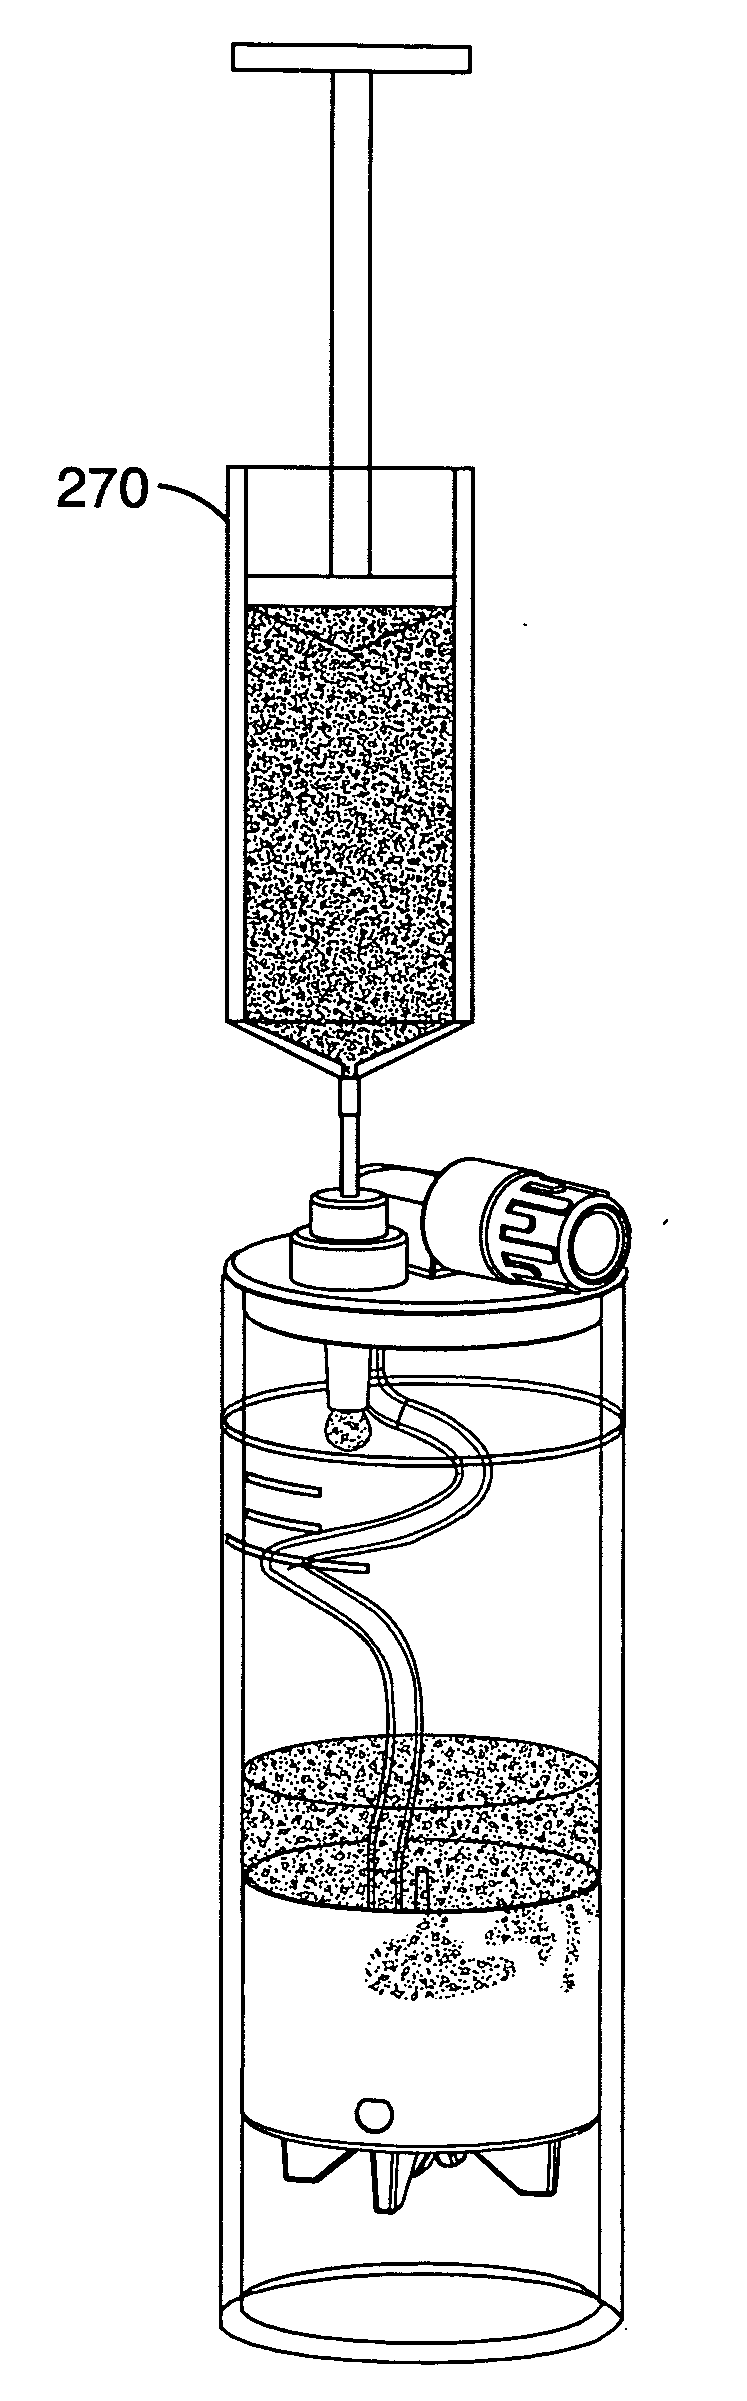 Apparatus and method for separating and isolating components of a biological fluid